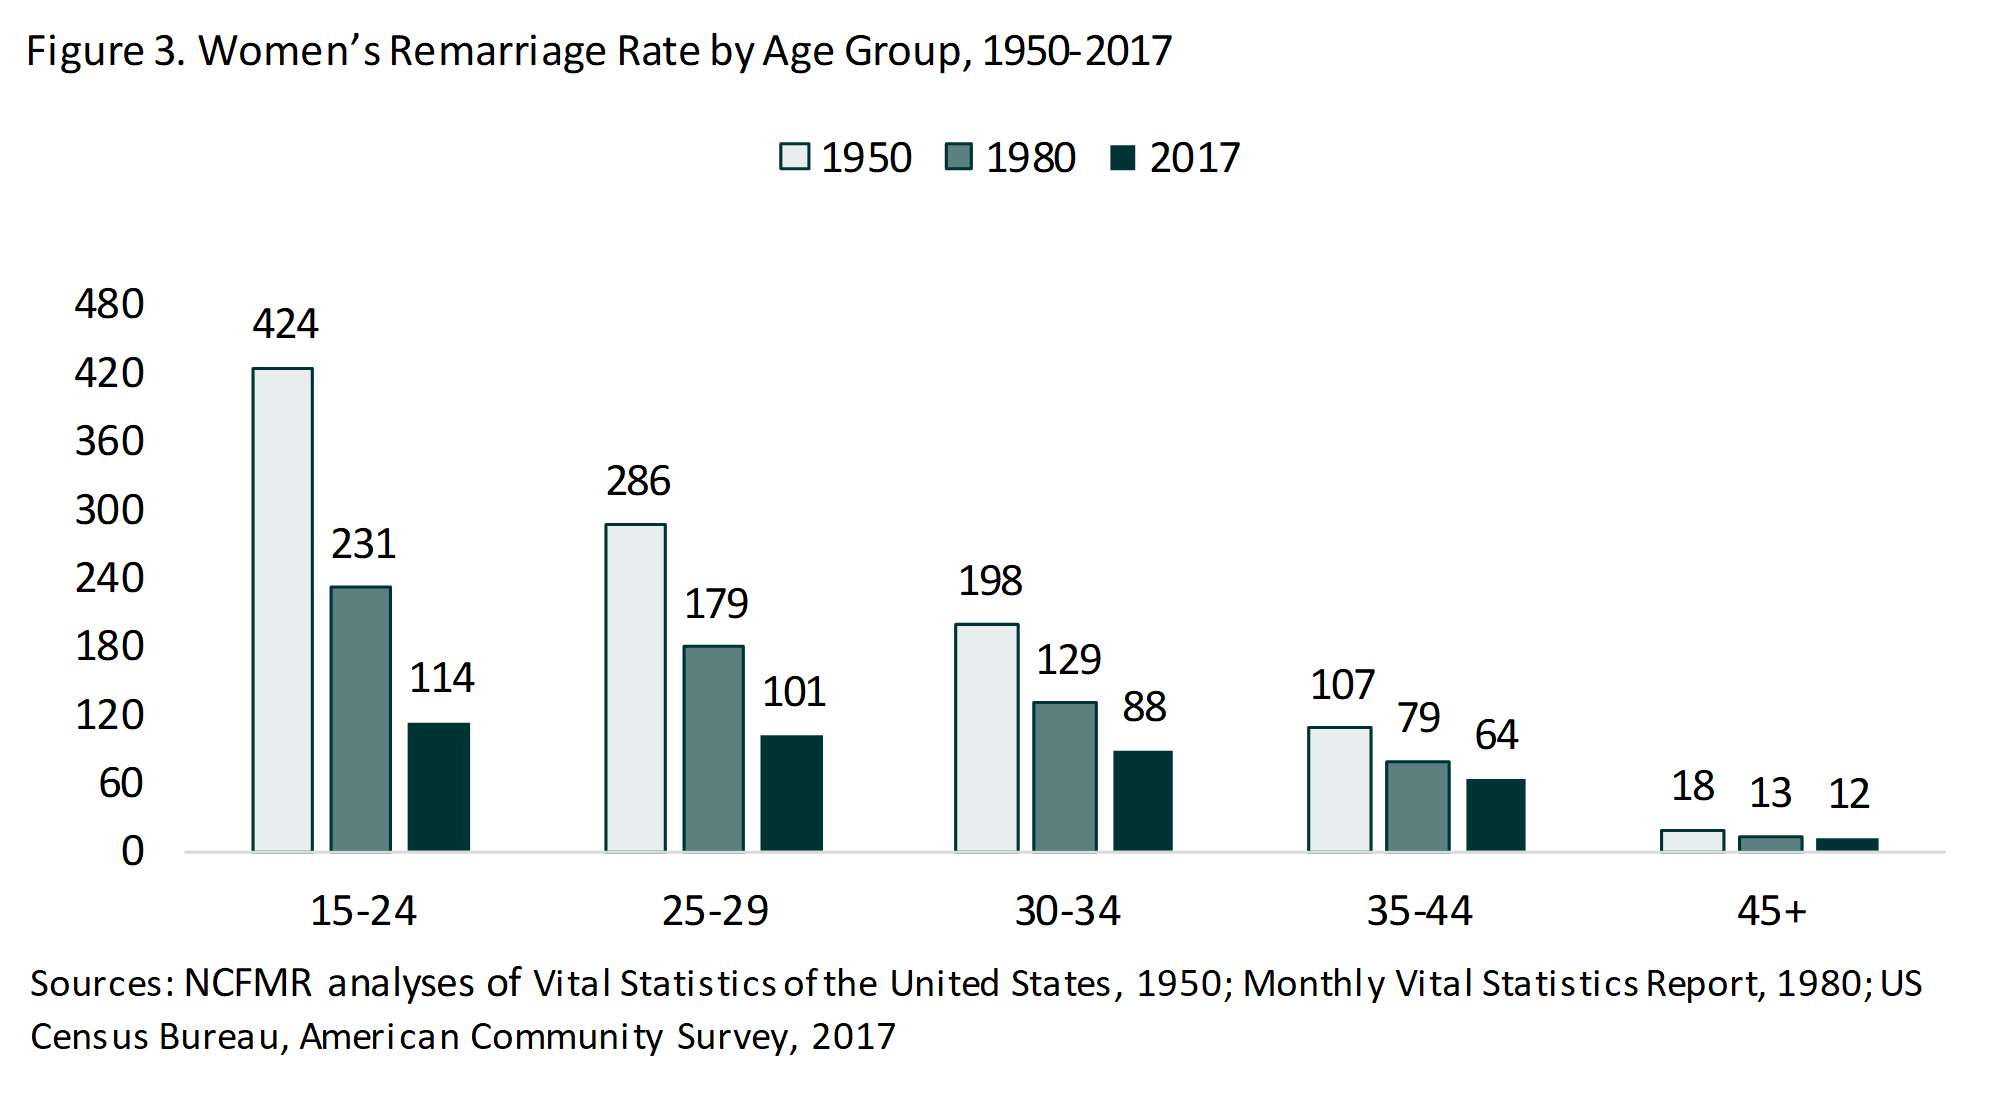 Teal bar chart showing Women's Remarriage Rate by Age Group, 1950-2017